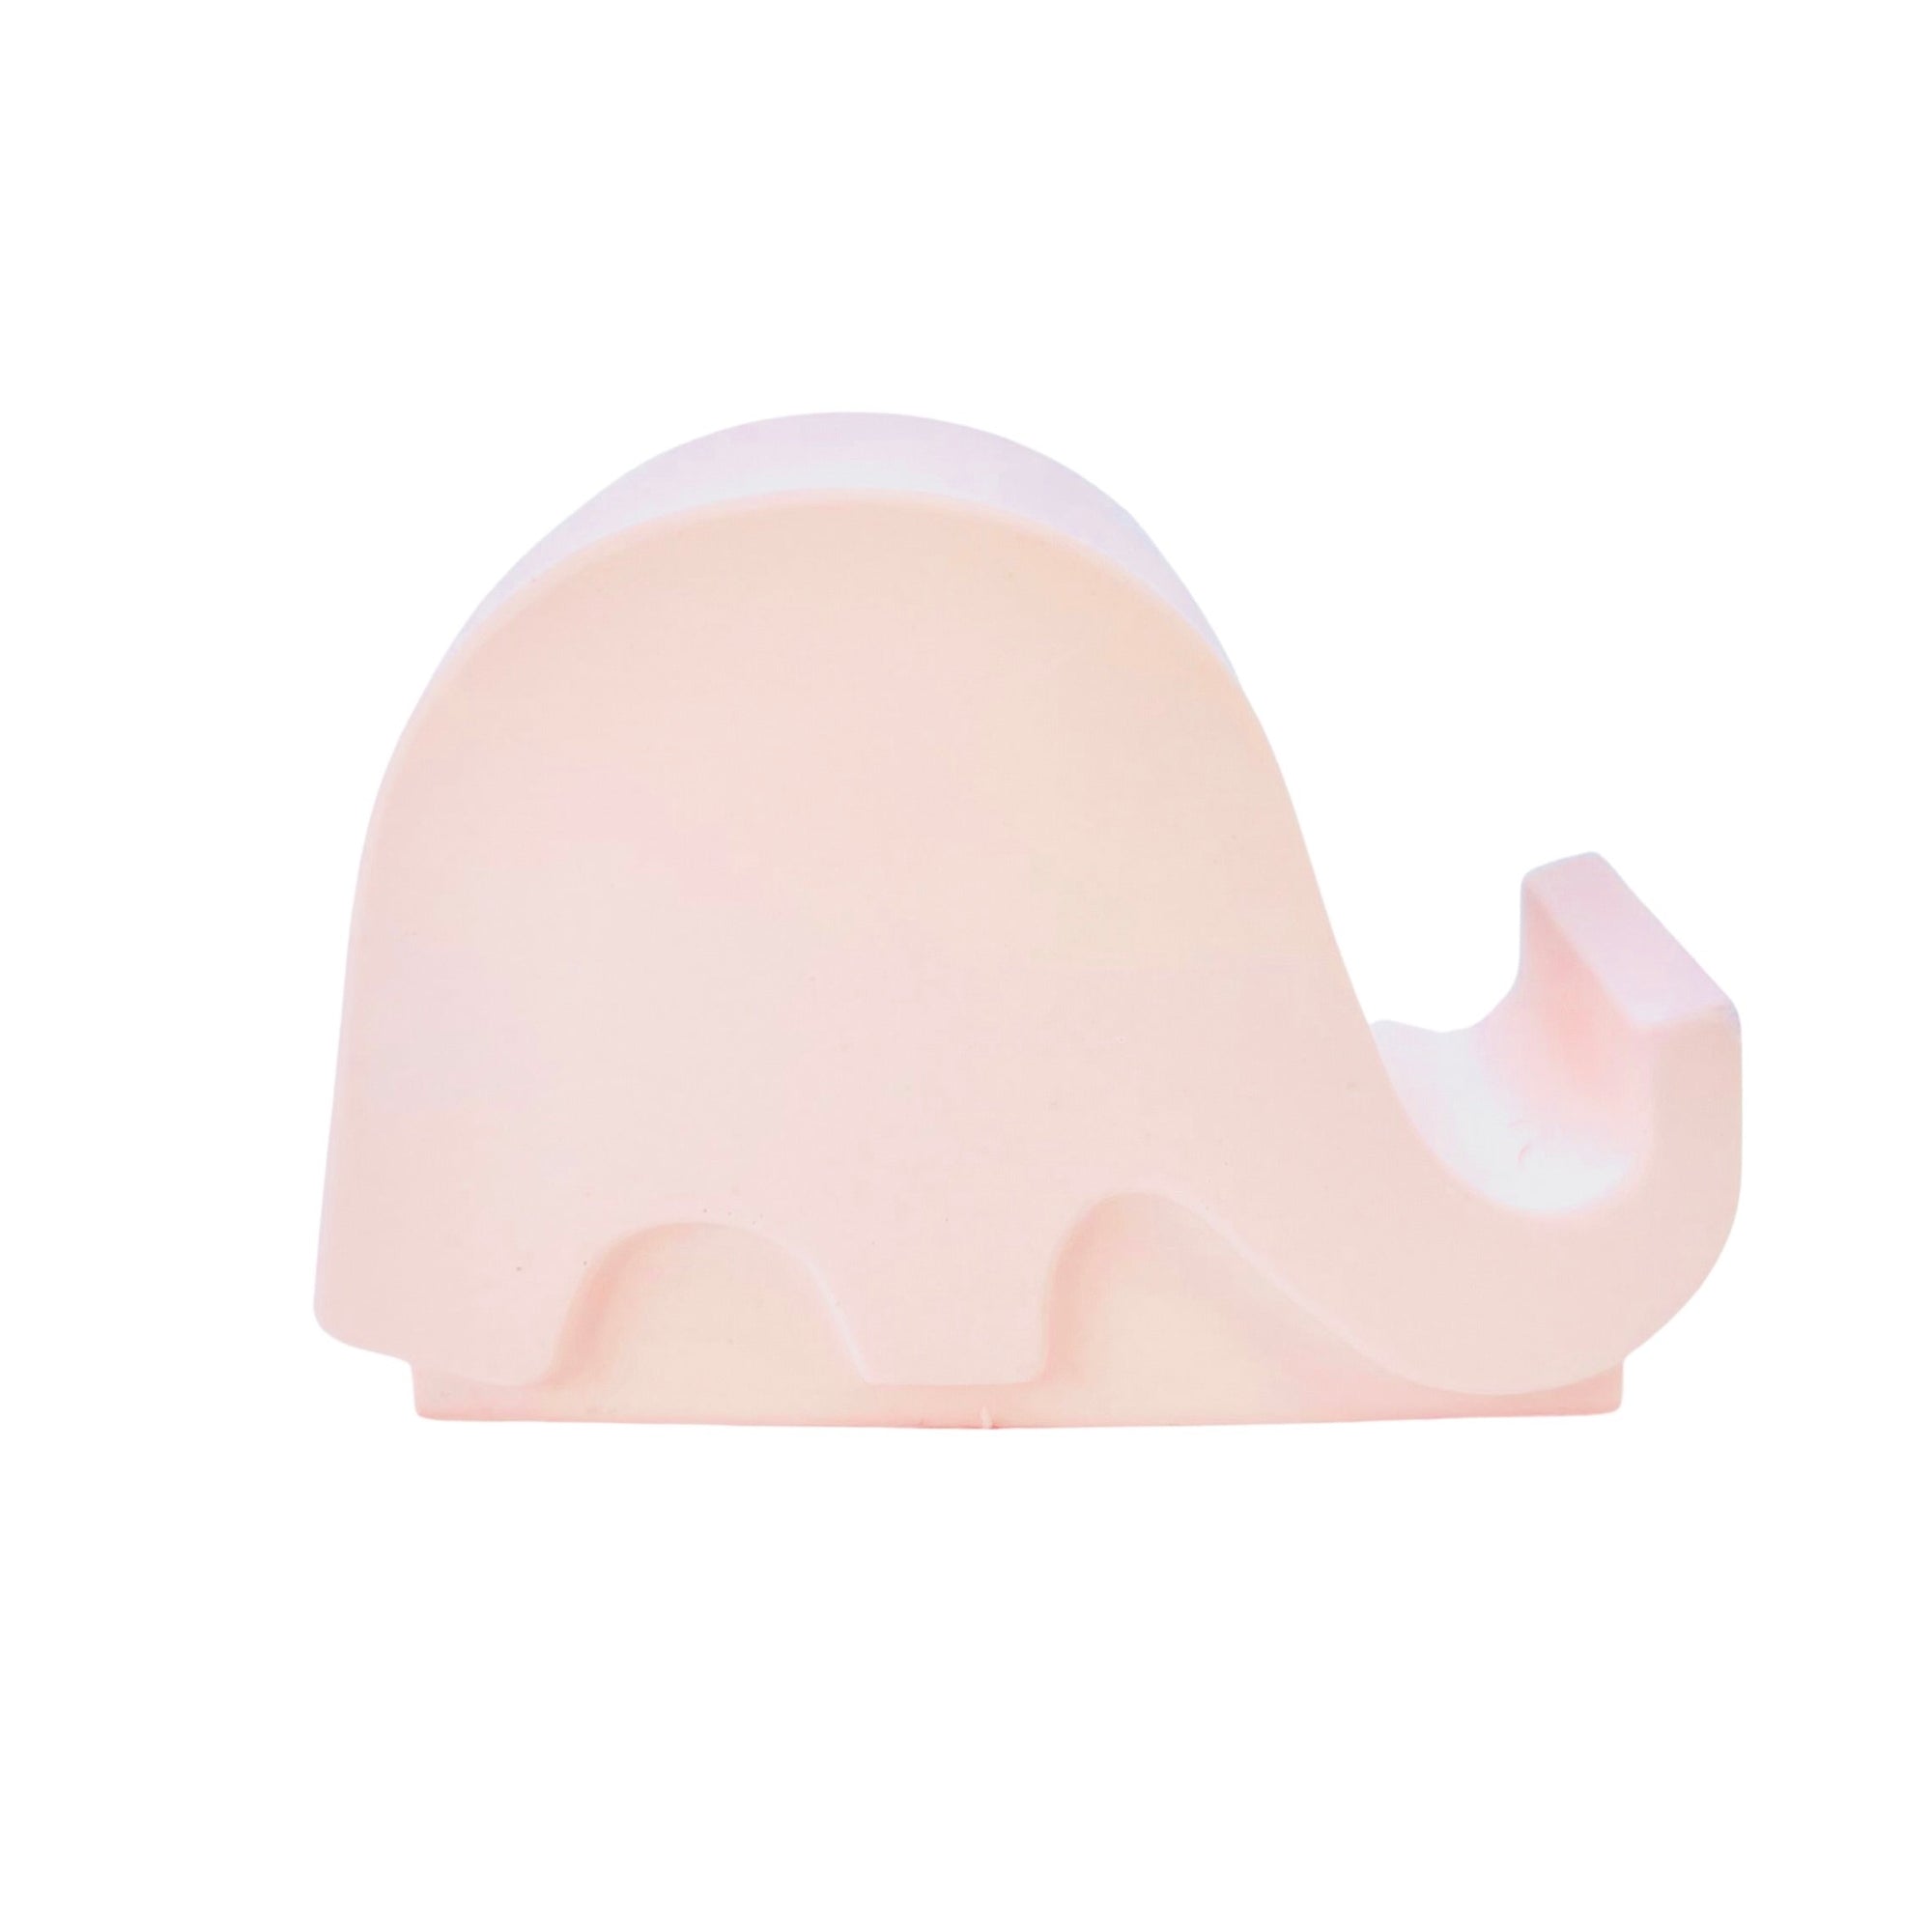 A Jesmonite elephant mobile phone stand measuring 6.5cm in length with baby pink pigment.